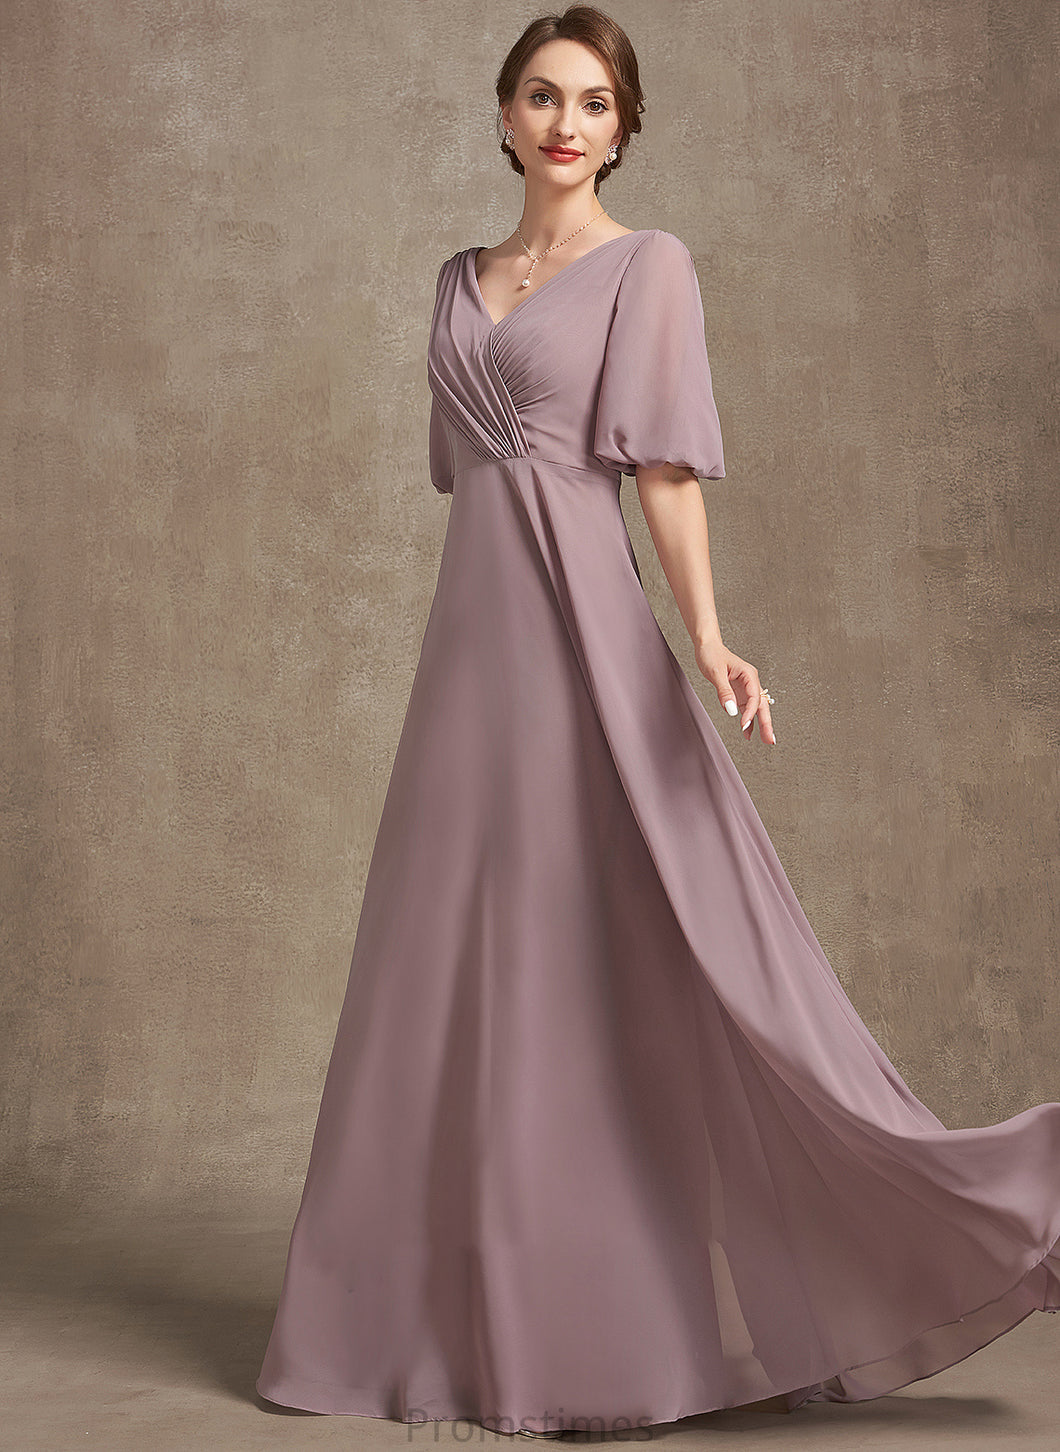 A-Line Addison V-neck Mother Dress of Ruffle the Bride Chiffon Mother of the Bride Dresses With Floor-Length